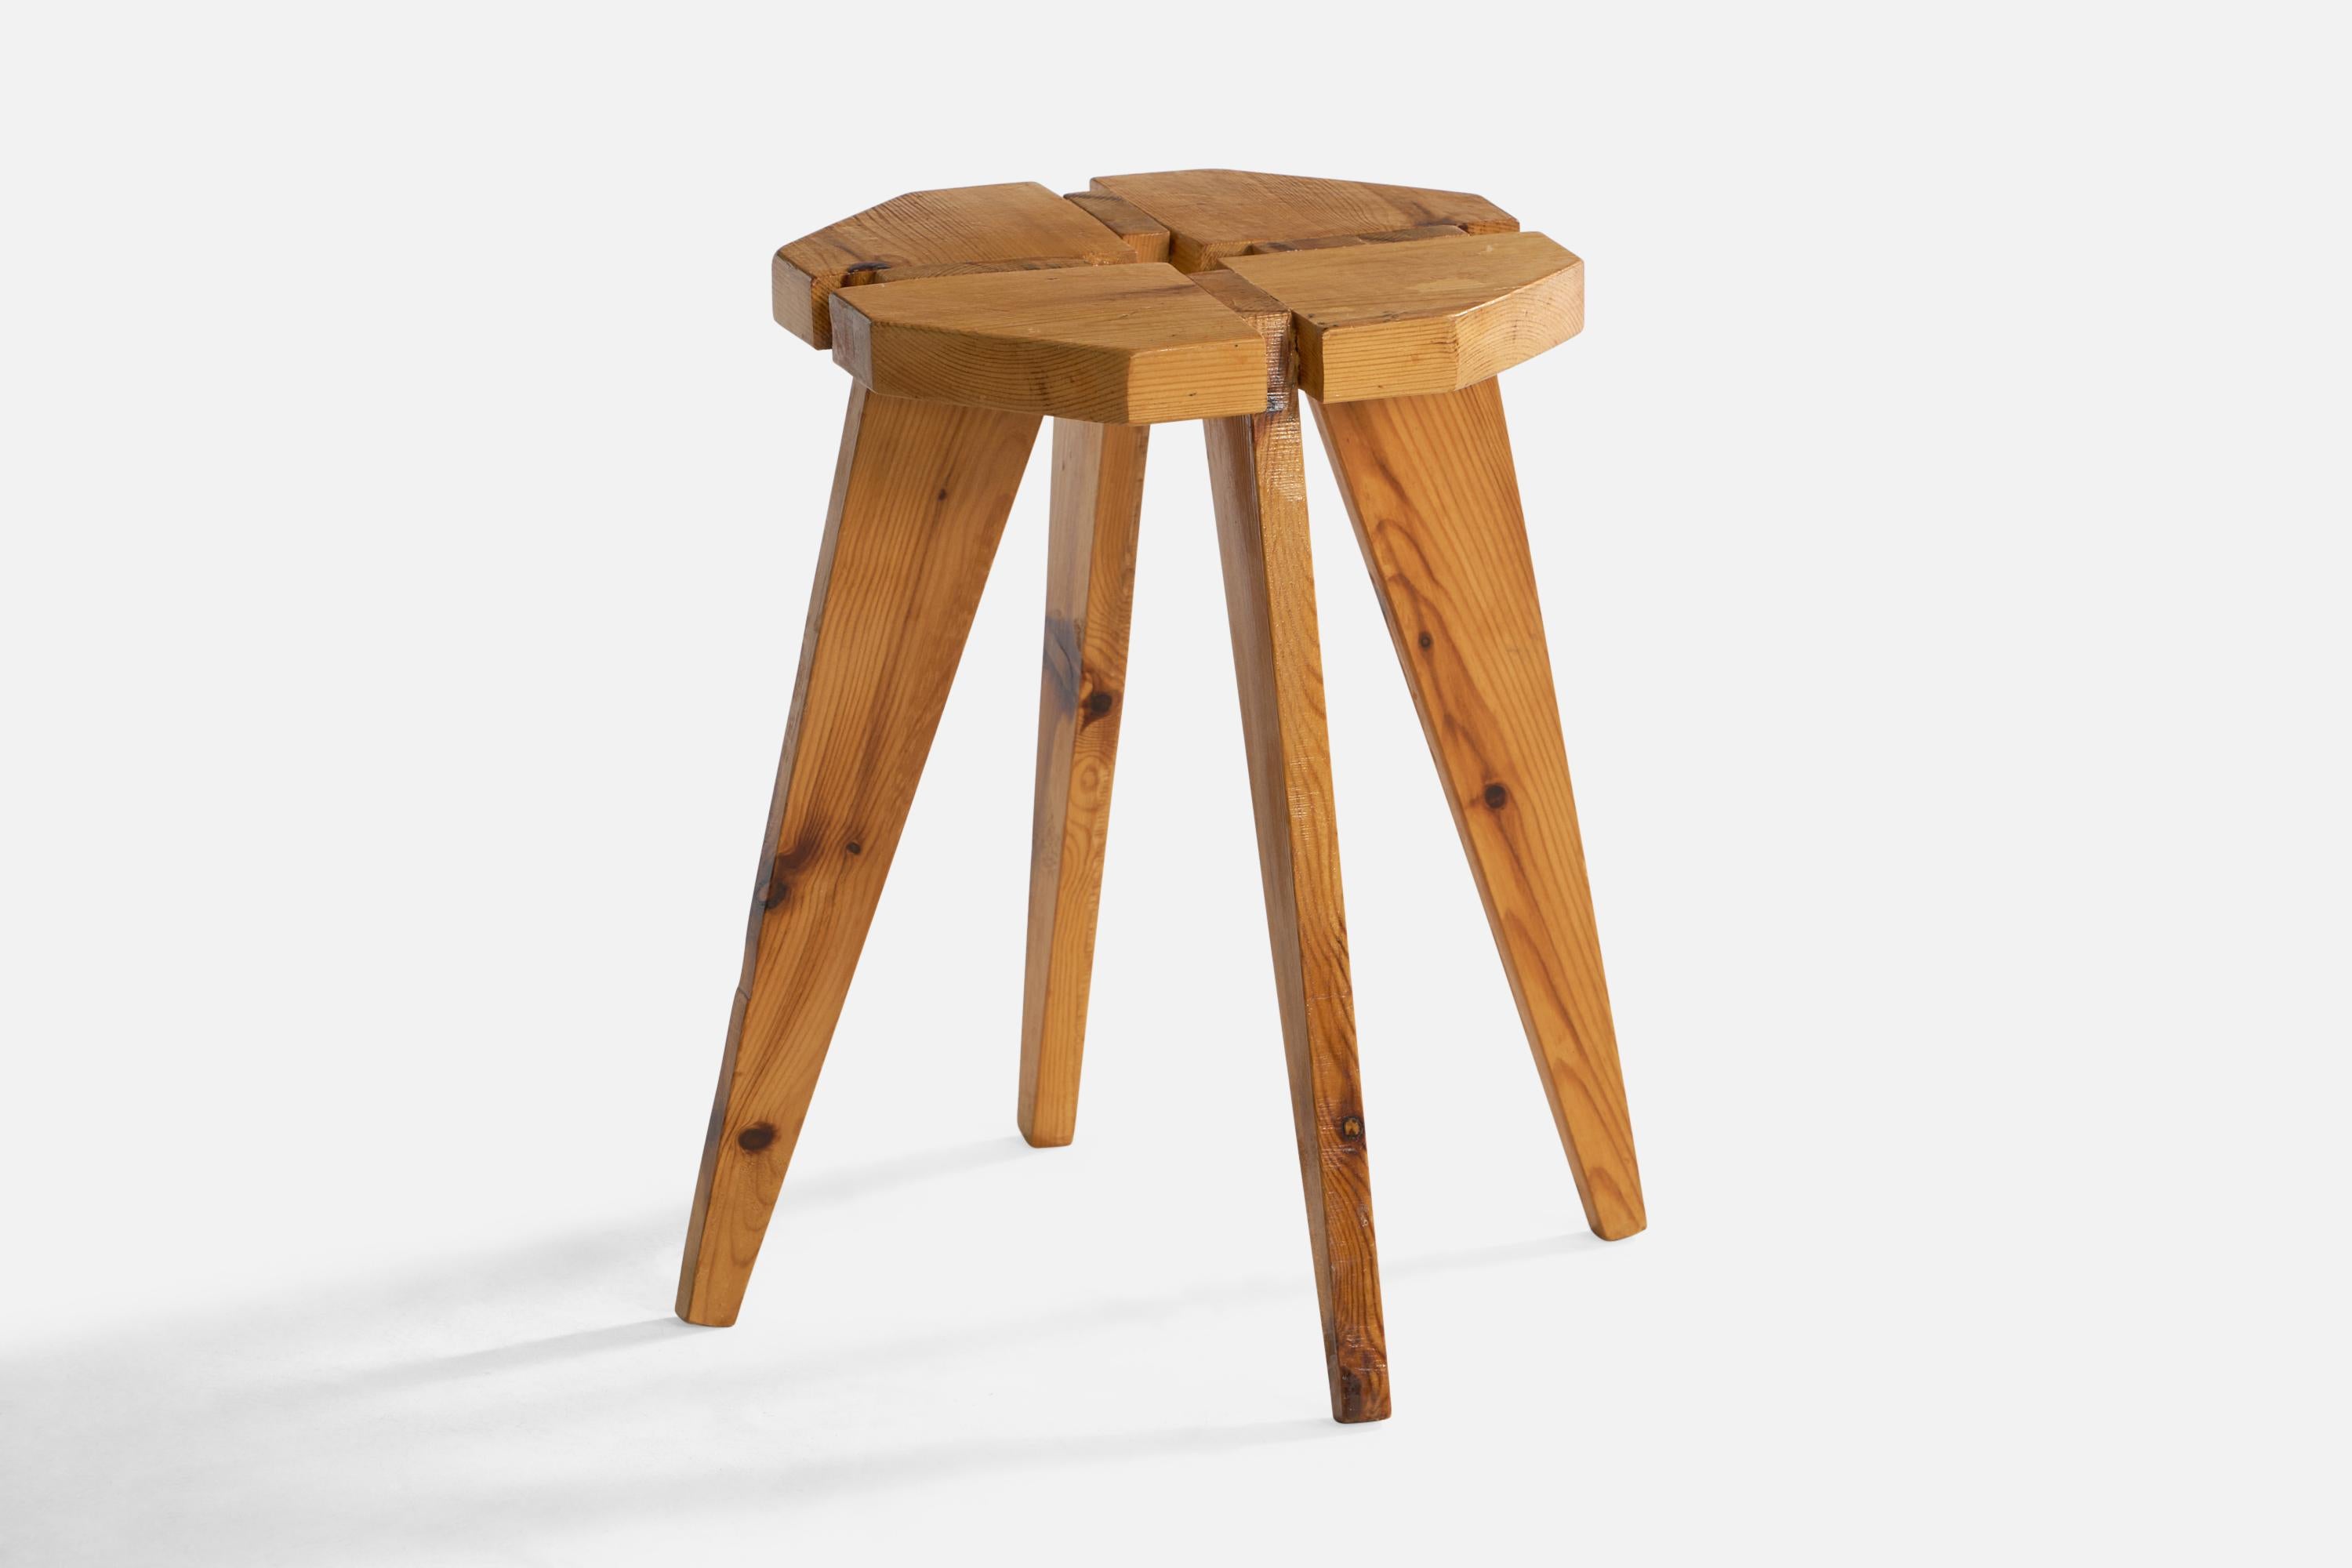 A pine stool designed and produced in Sweden, 1970s.

Seat height: 16.4”